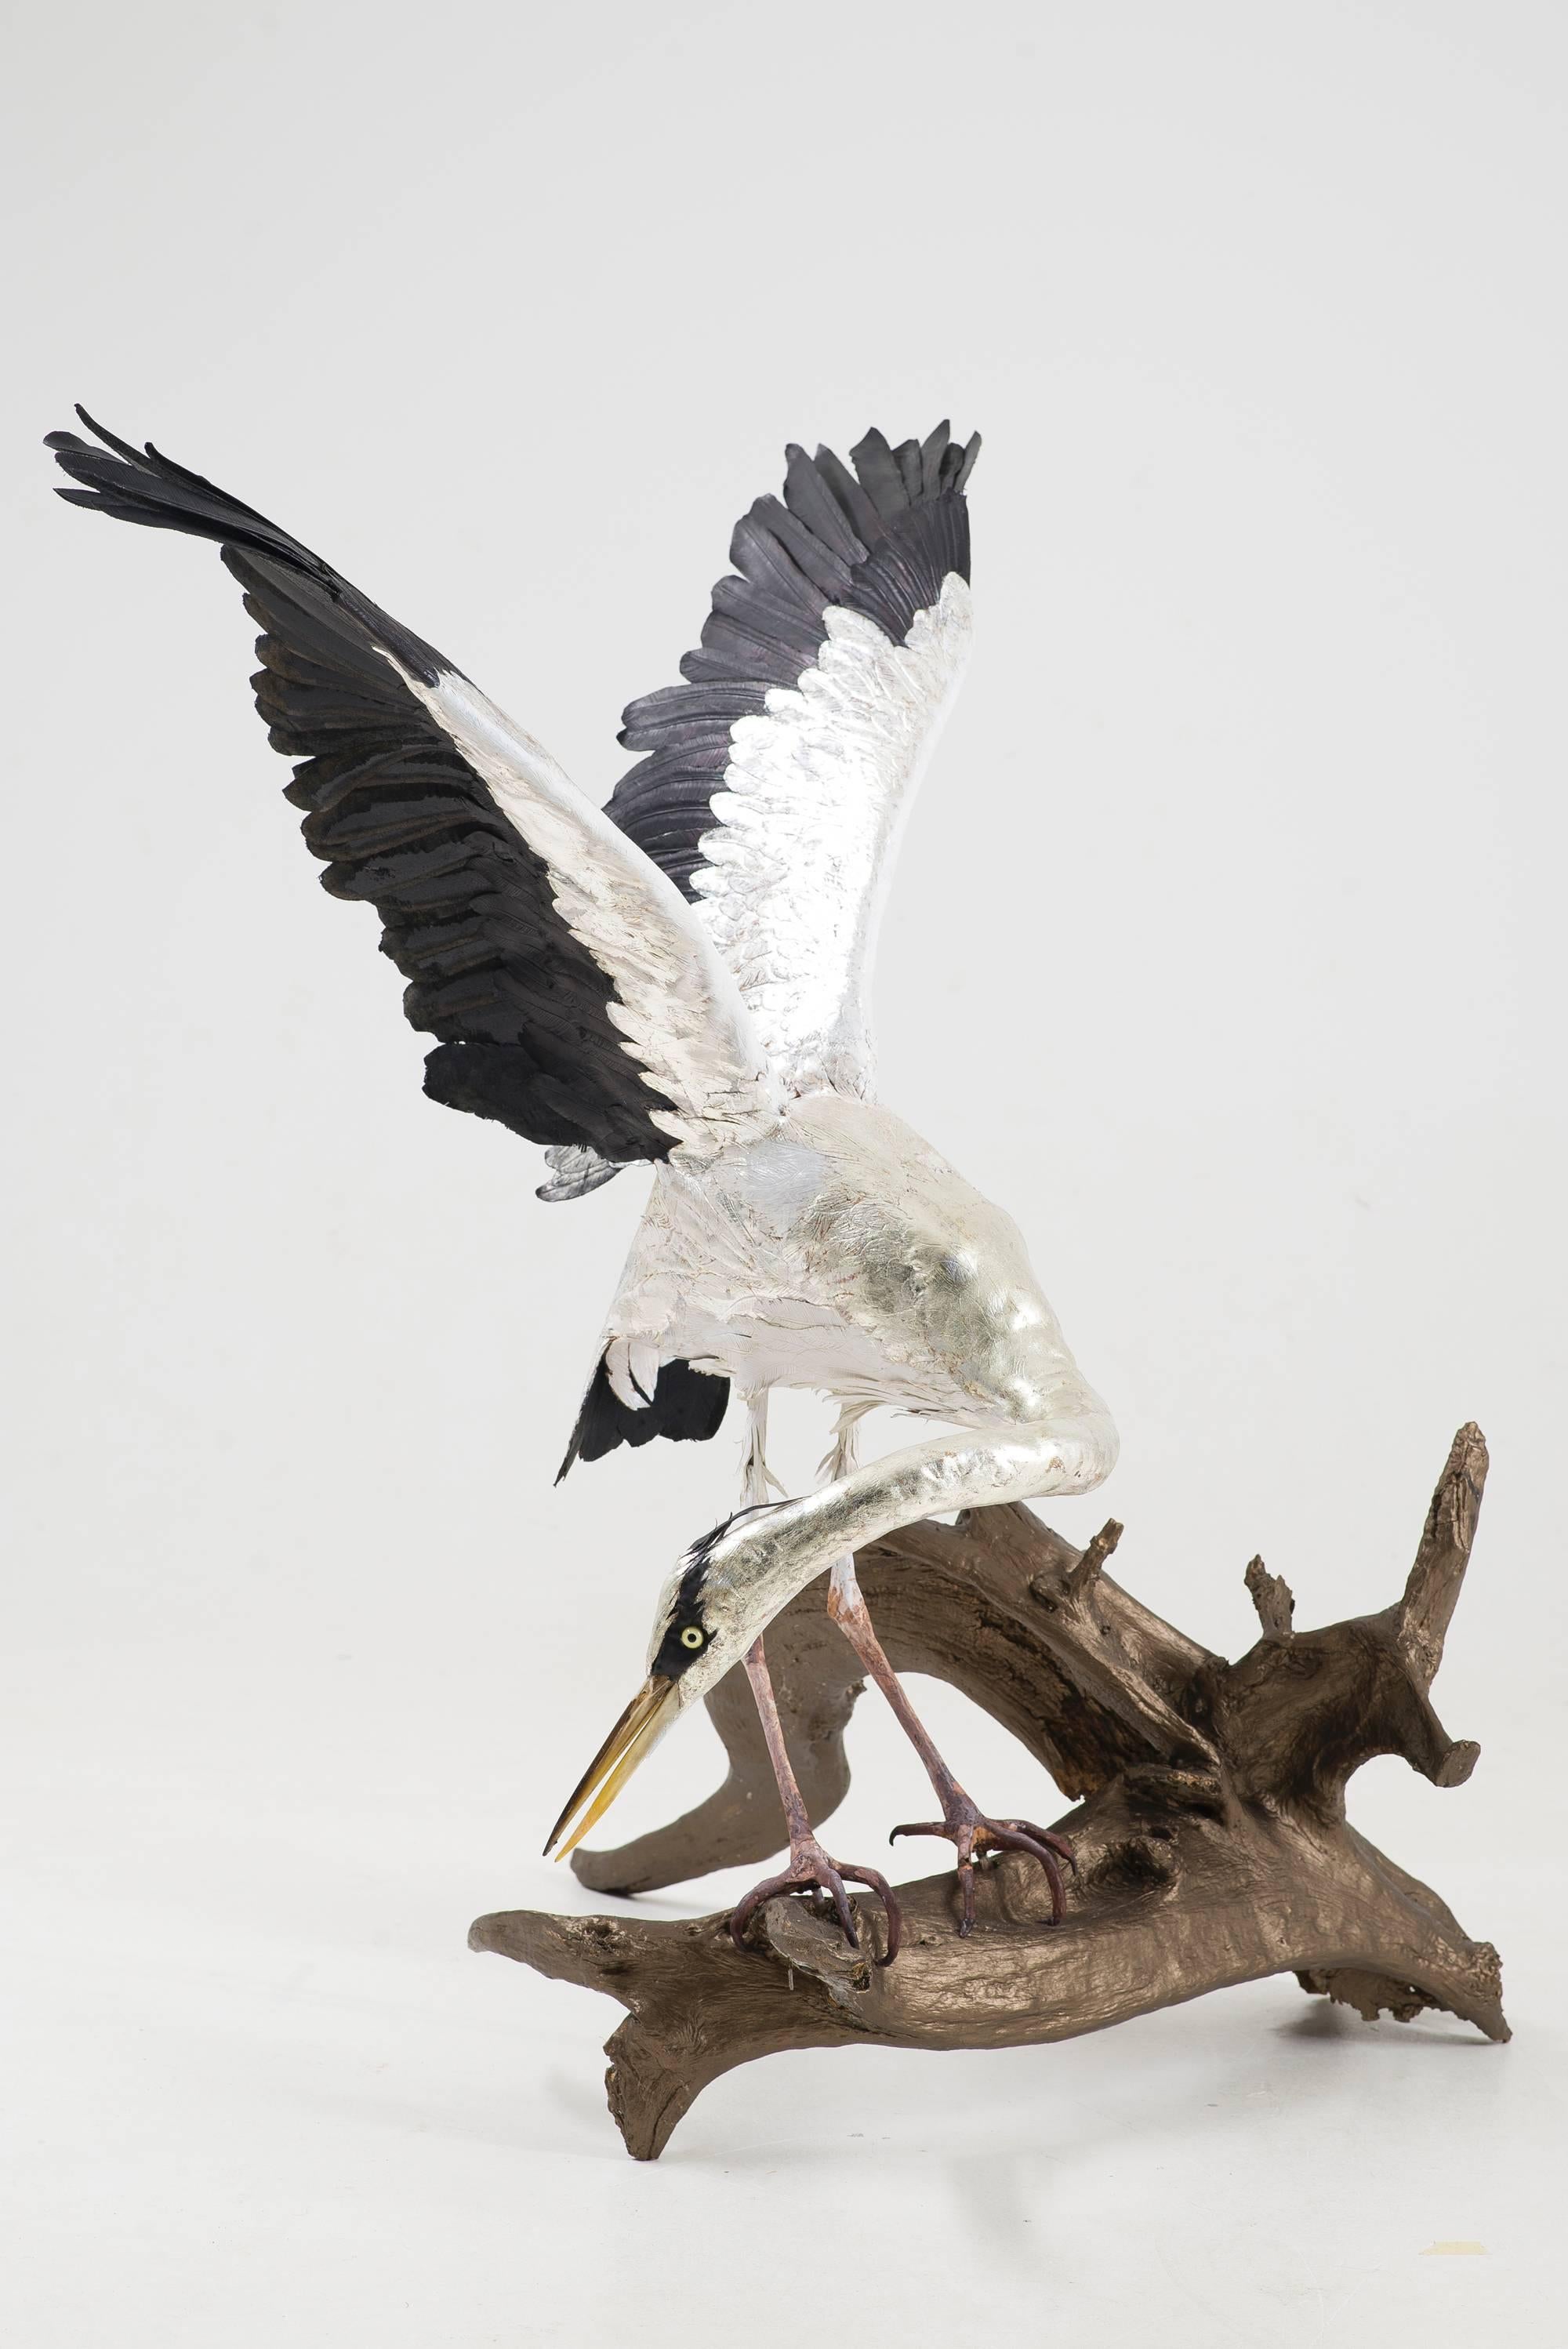 The artist, Georgina Brett-Chinnery, is an award winning leather worker who exploits traditional techniques to create tangible sculptural forms. Her latest series of work of which these herons are part has received the UK Cockpit Arts and